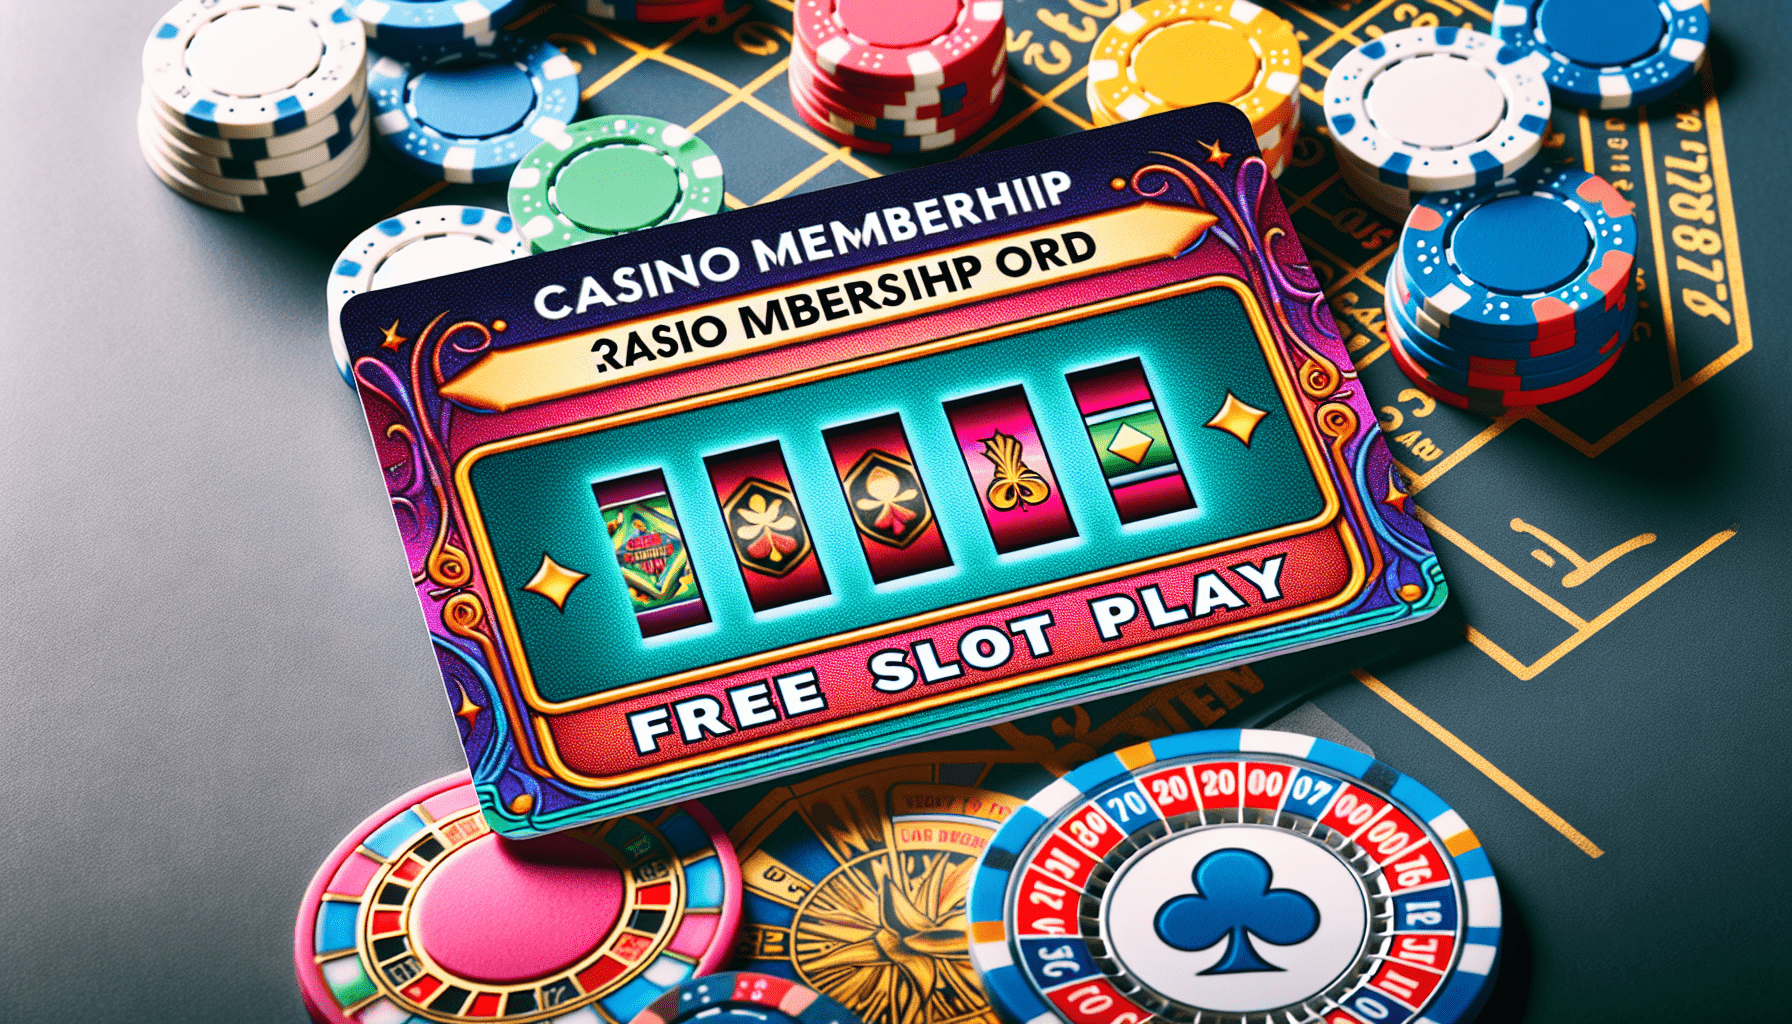 Can You Use Someone Else’s Free Slot Play?